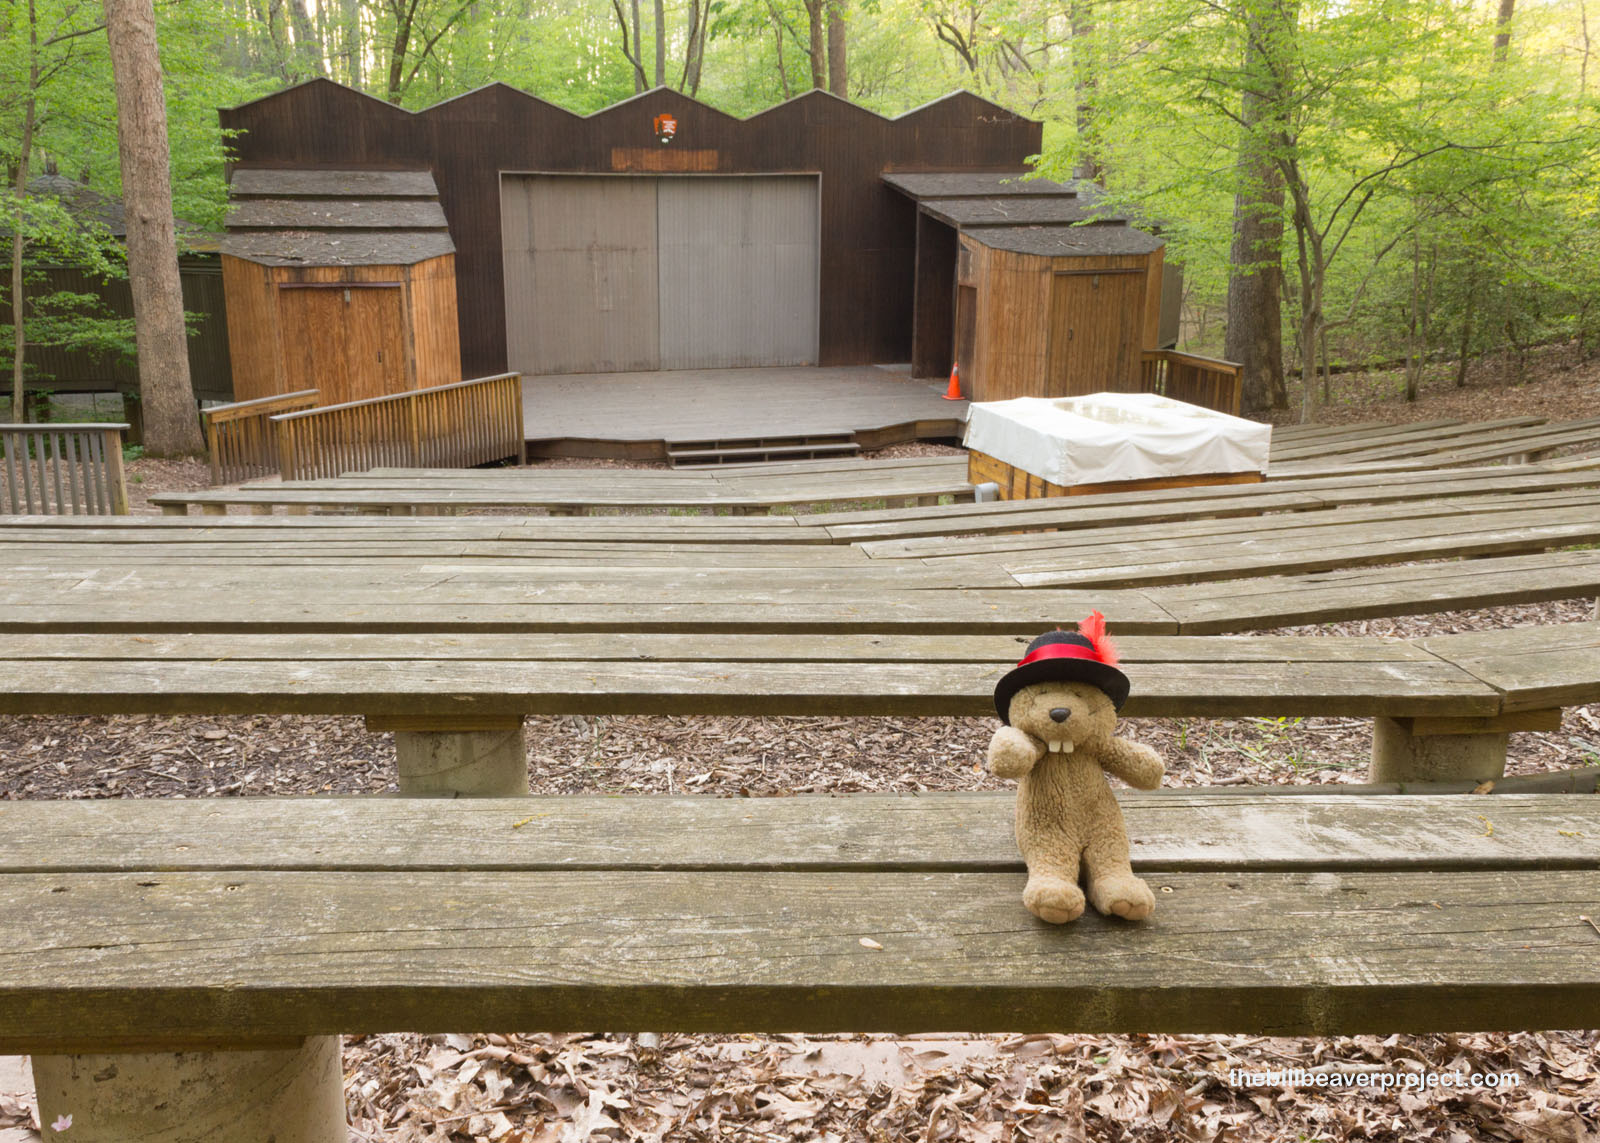 The Children's Theatre-in-the-Woods!